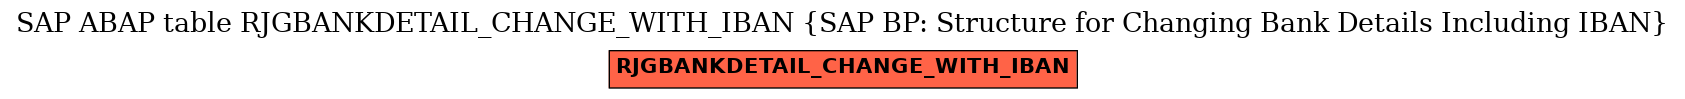 E-R Diagram for table RJGBANKDETAIL_CHANGE_WITH_IBAN (SAP BP: Structure for Changing Bank Details Including IBAN)